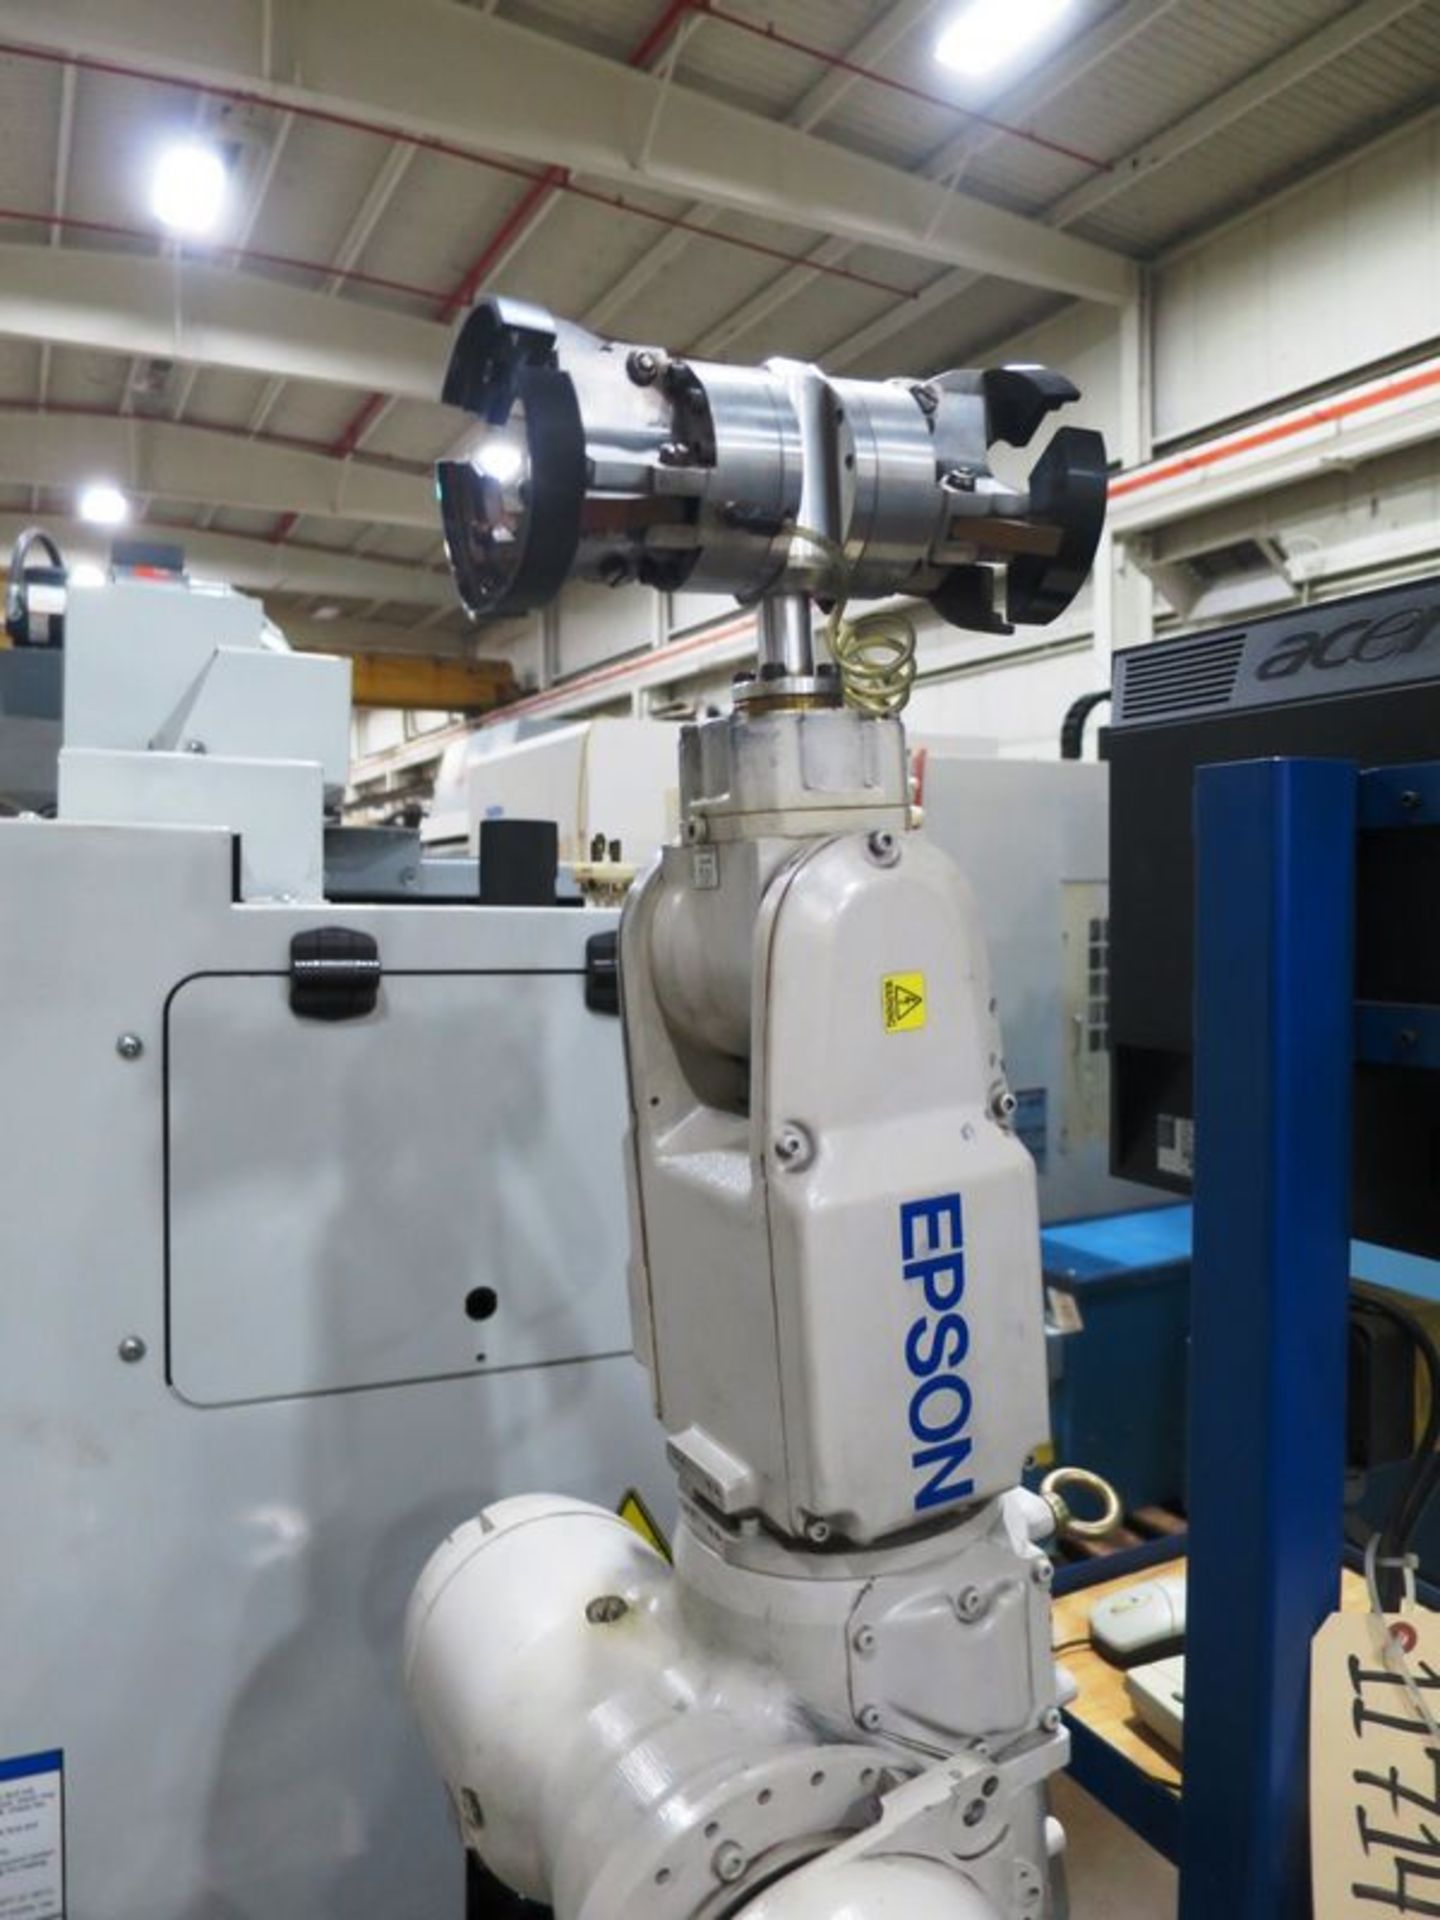 Haas SL-20T CNC 2-Axis Turning Center Lathe W/Epson 6-Axis Material Handling Robot, S/N 3084991, New - Image 12 of 15